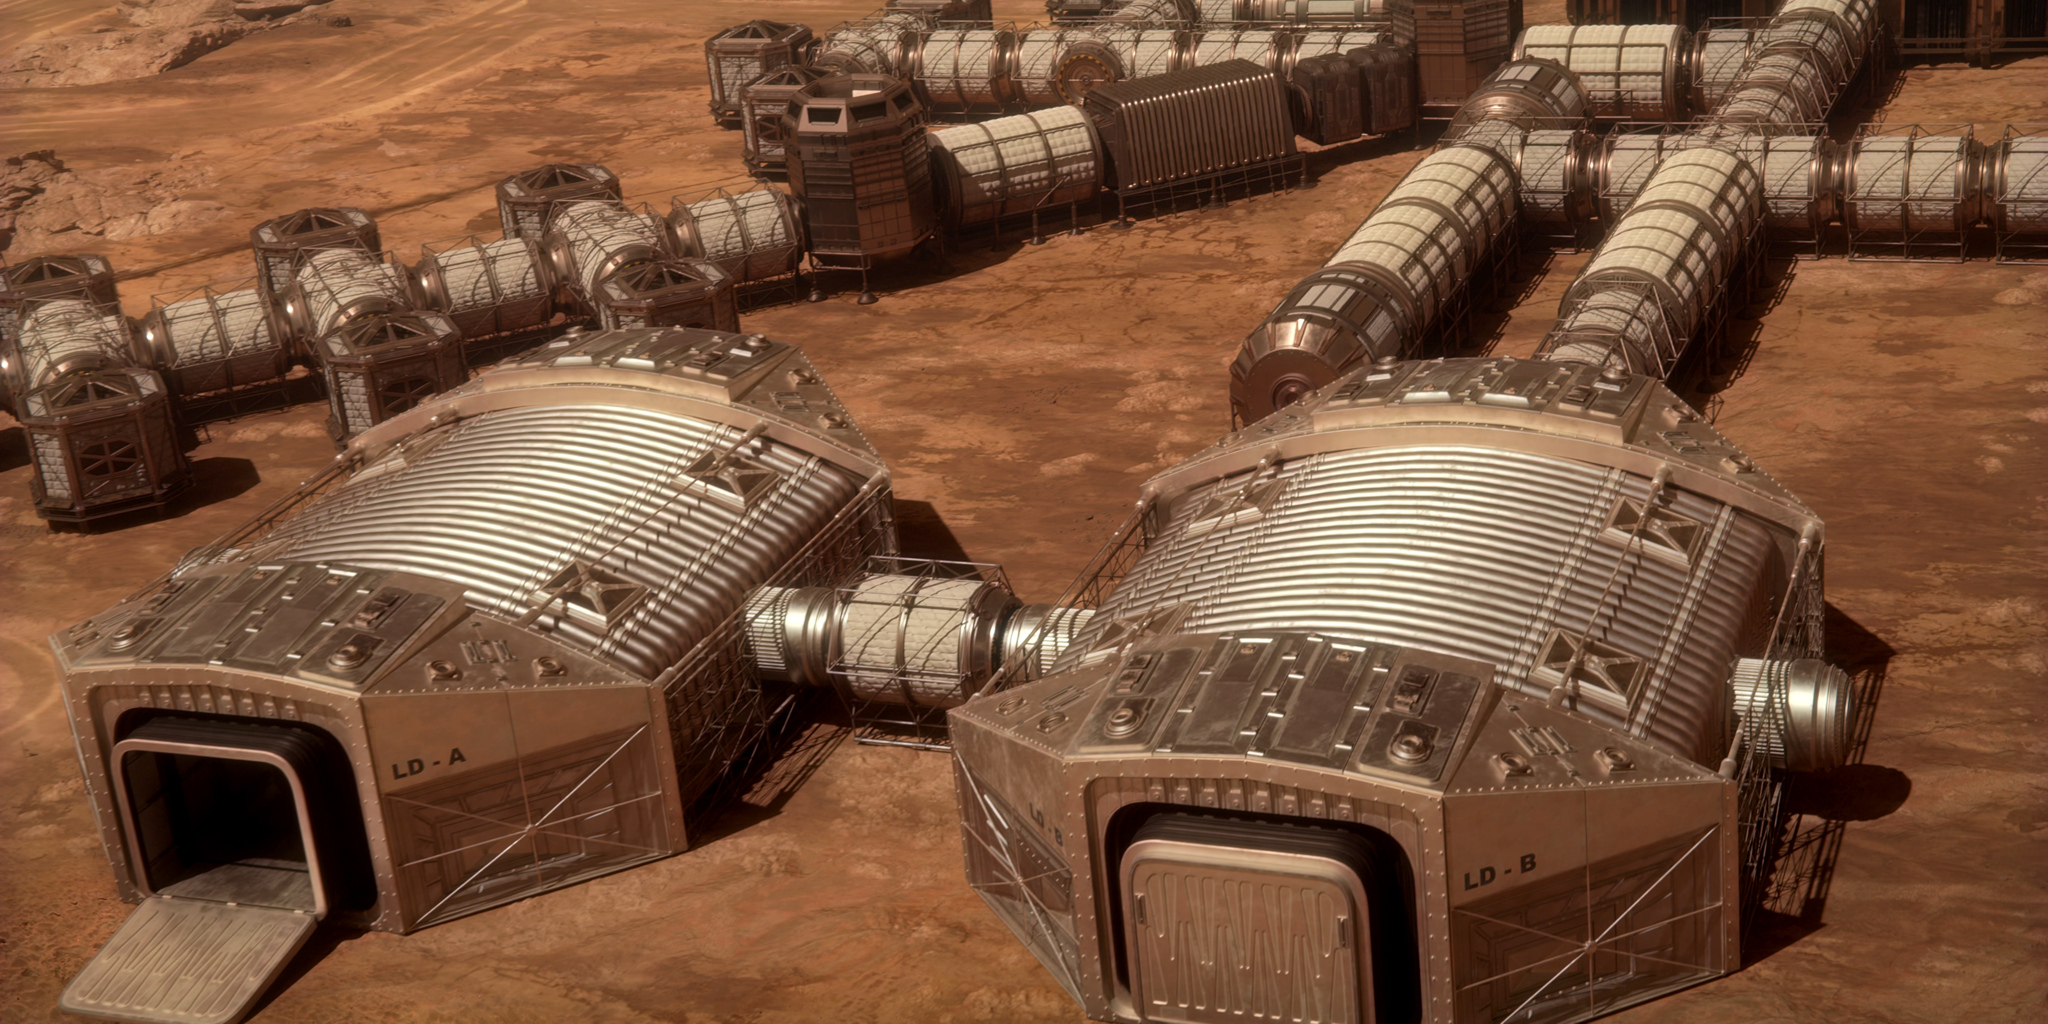 Terraforming Mars. The materials we would need to…, by Brandon Weigel, Our Space